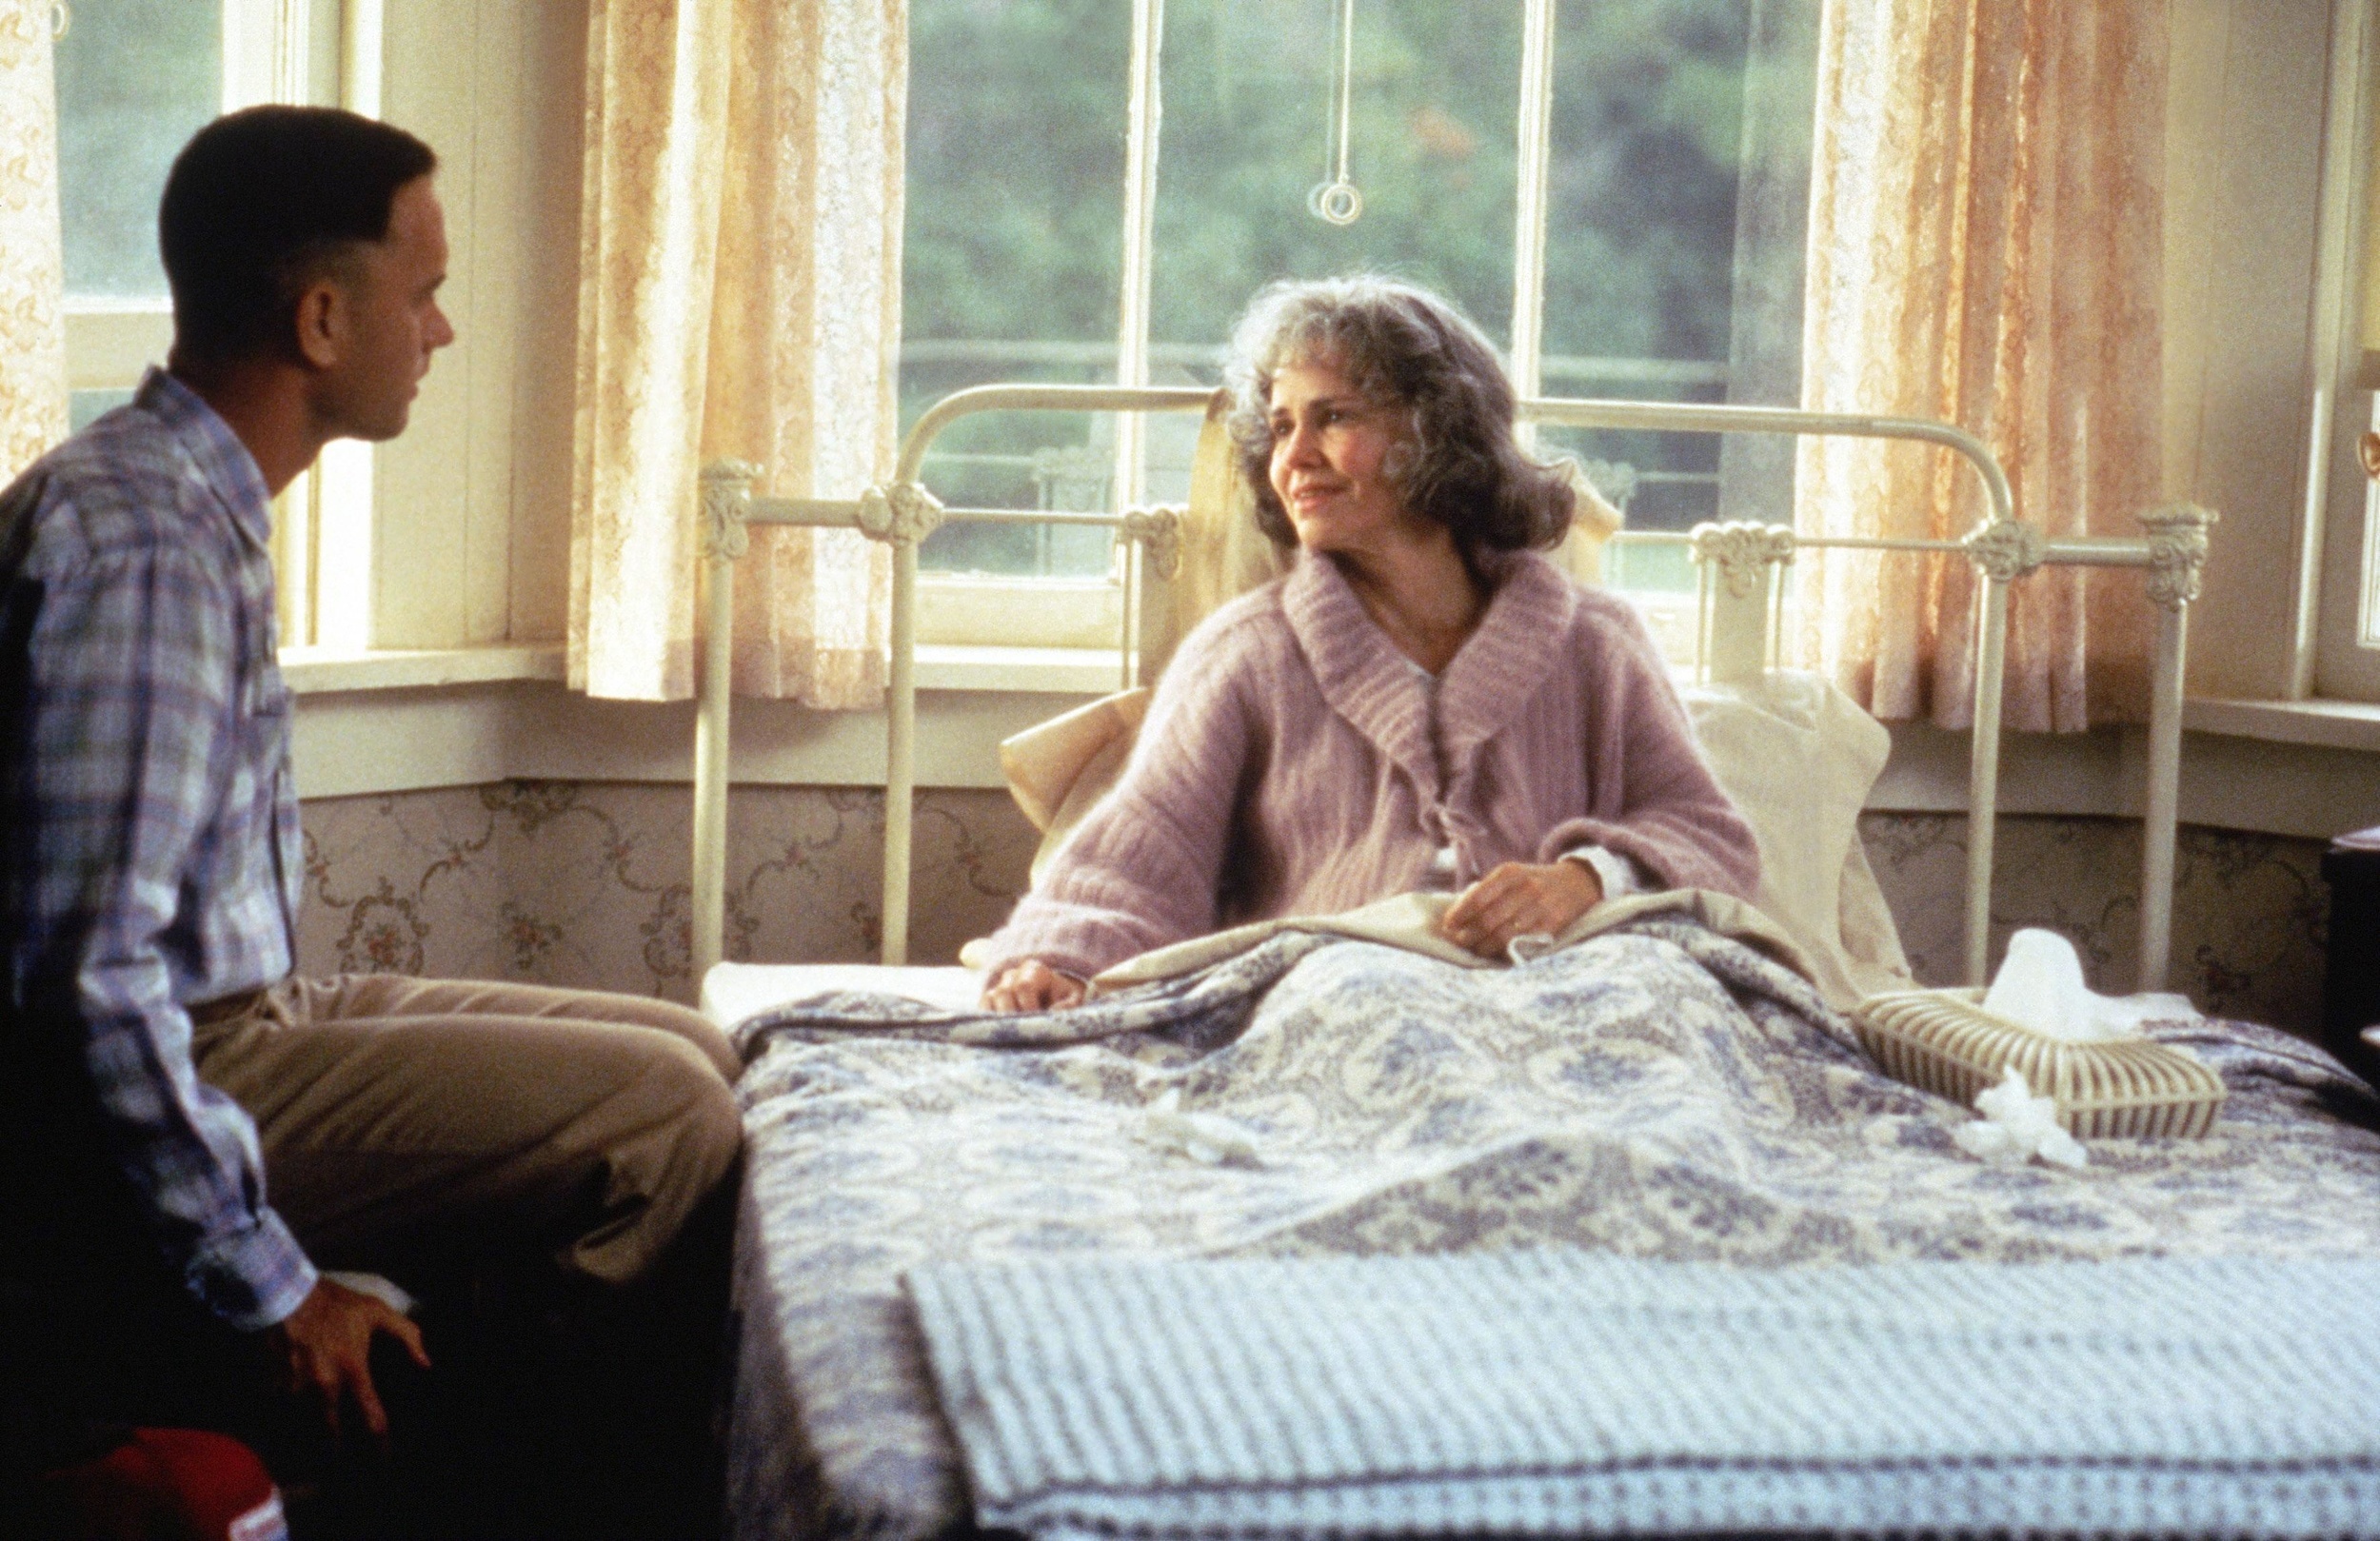 <p>Field plays Forrest’s mother, both when he is a child and an adult. Some old-age makeup was required for the latter. Field is only 10 years older than Hanks. The two played contemporaries and love interests in the ‘80s comedy <em>Punchline</em>.</p><p><a href='https://www.msn.com/en-us/community/channel/vid-cj9pqbr0vn9in2b6ddcd8sfgpfq6x6utp44fssrv6mc2gtybw0us'>Follow us on MSN to see more of our exclusive entertainment content.</a></p>